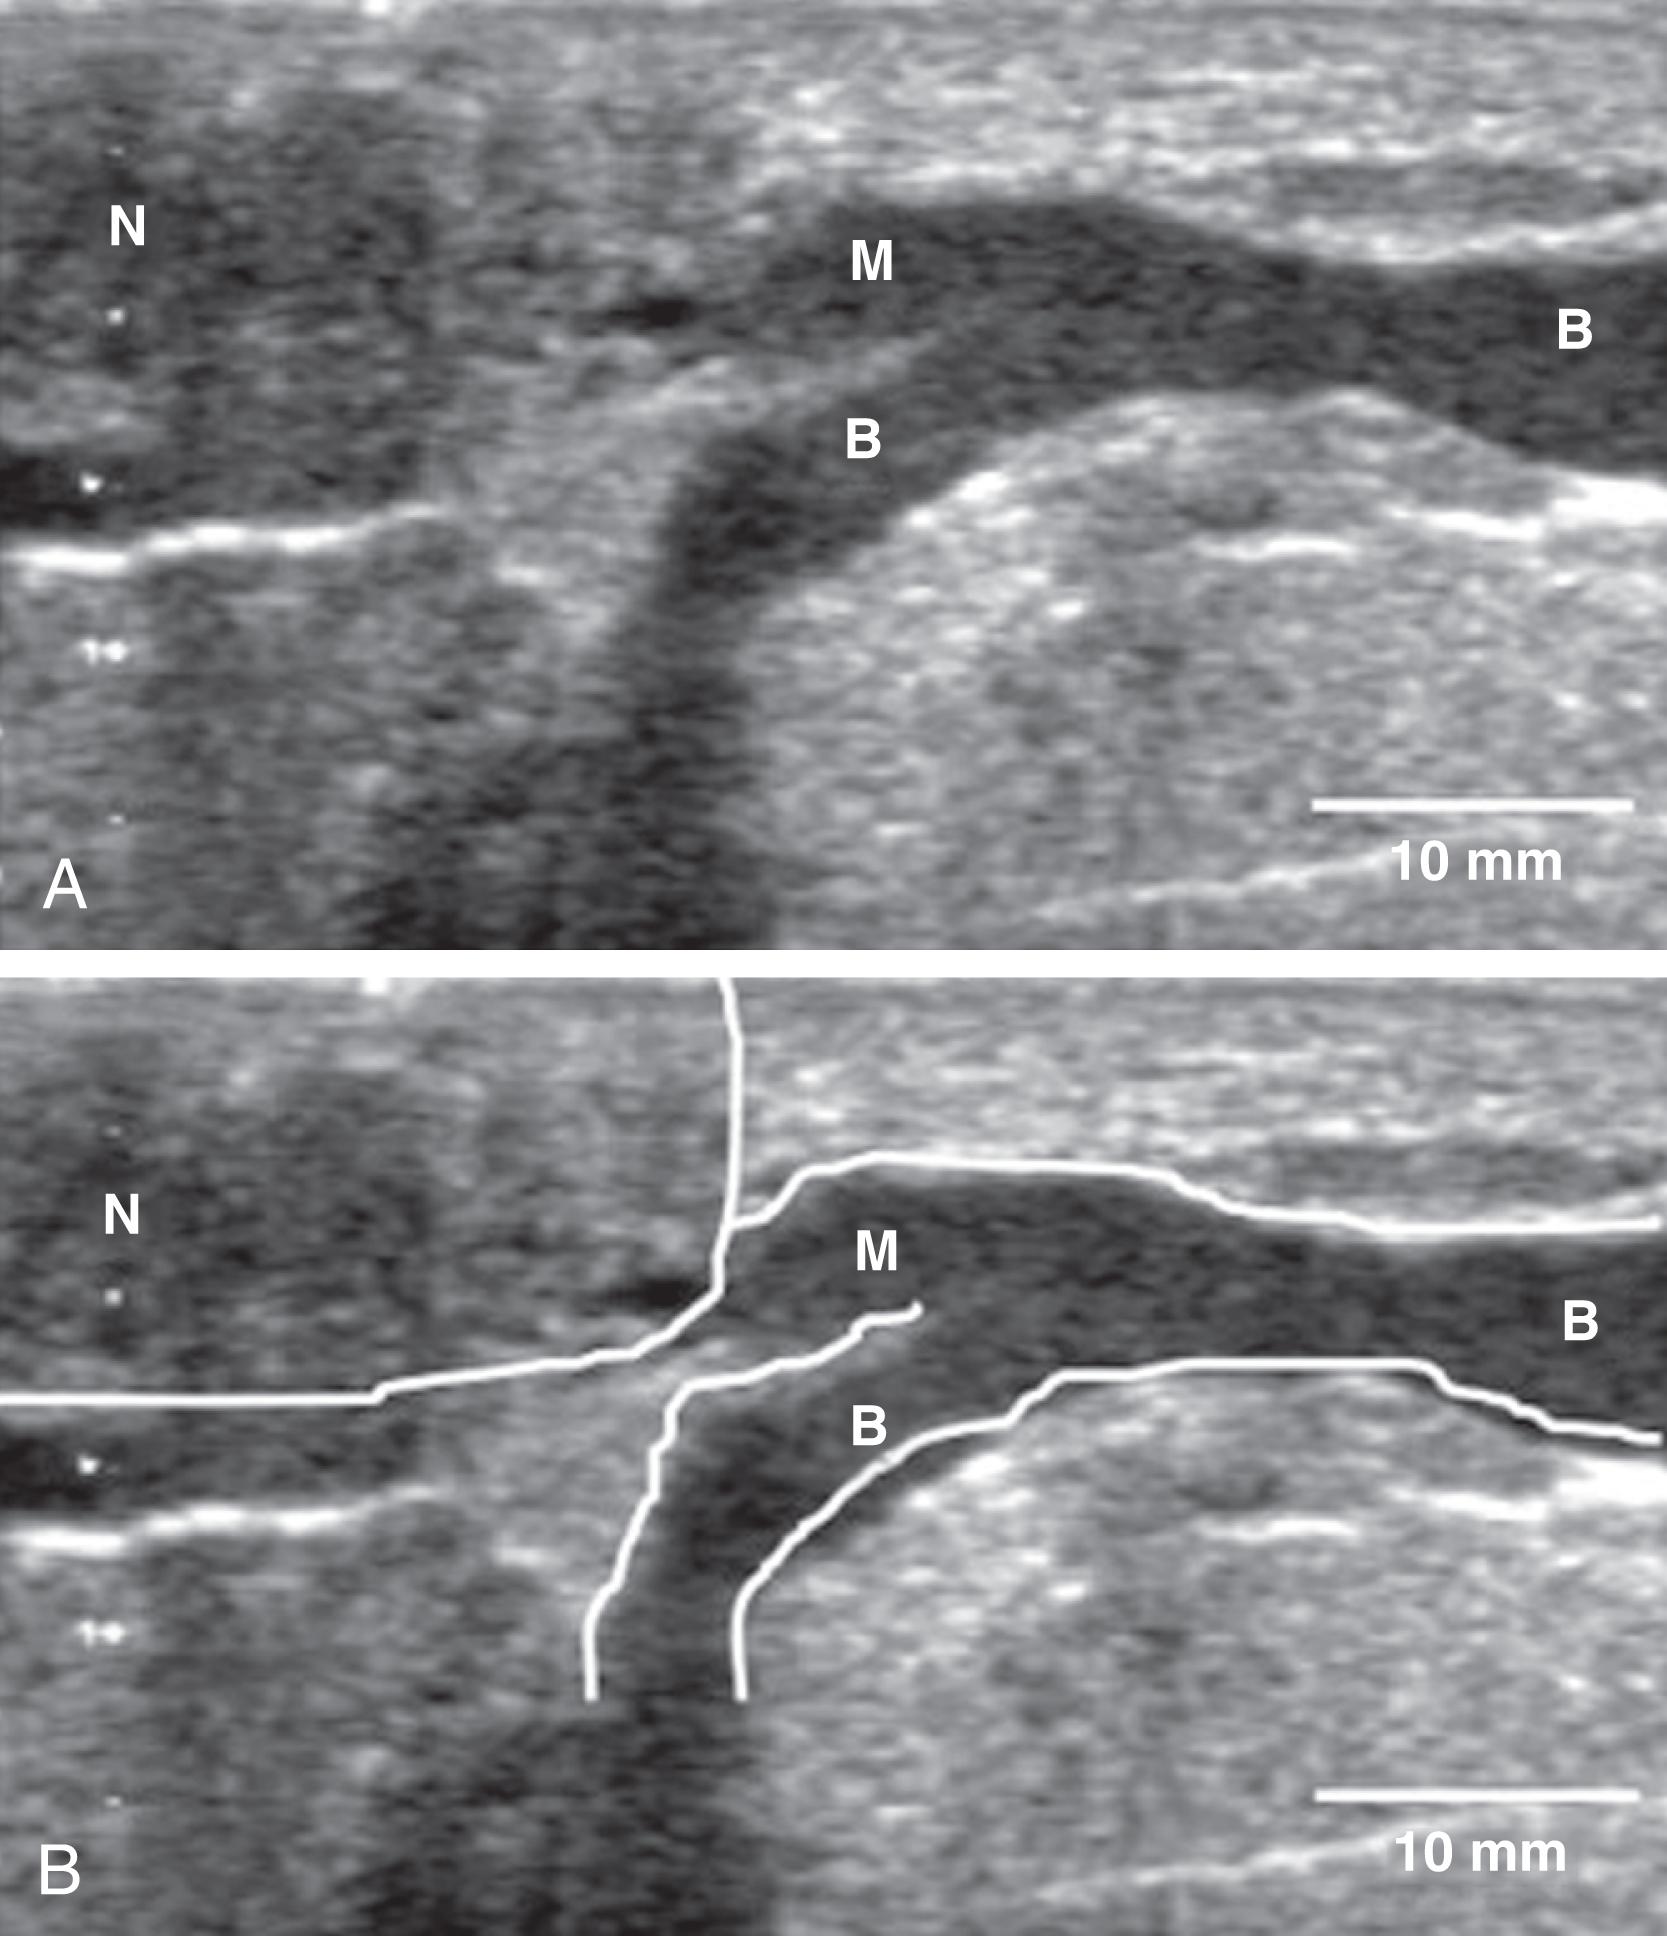 Fig. 3.8, (A and B) Ultrasound image of a main milk duct (Toshiba, Aplio). The nipple is the round hypoechoic (dark) structure in the left of the image (N) . The main duct (M) branches into two ducts (B) approximately 5 mm from the nipple. Note the small diameter of the ducts (approximately 3 mm).